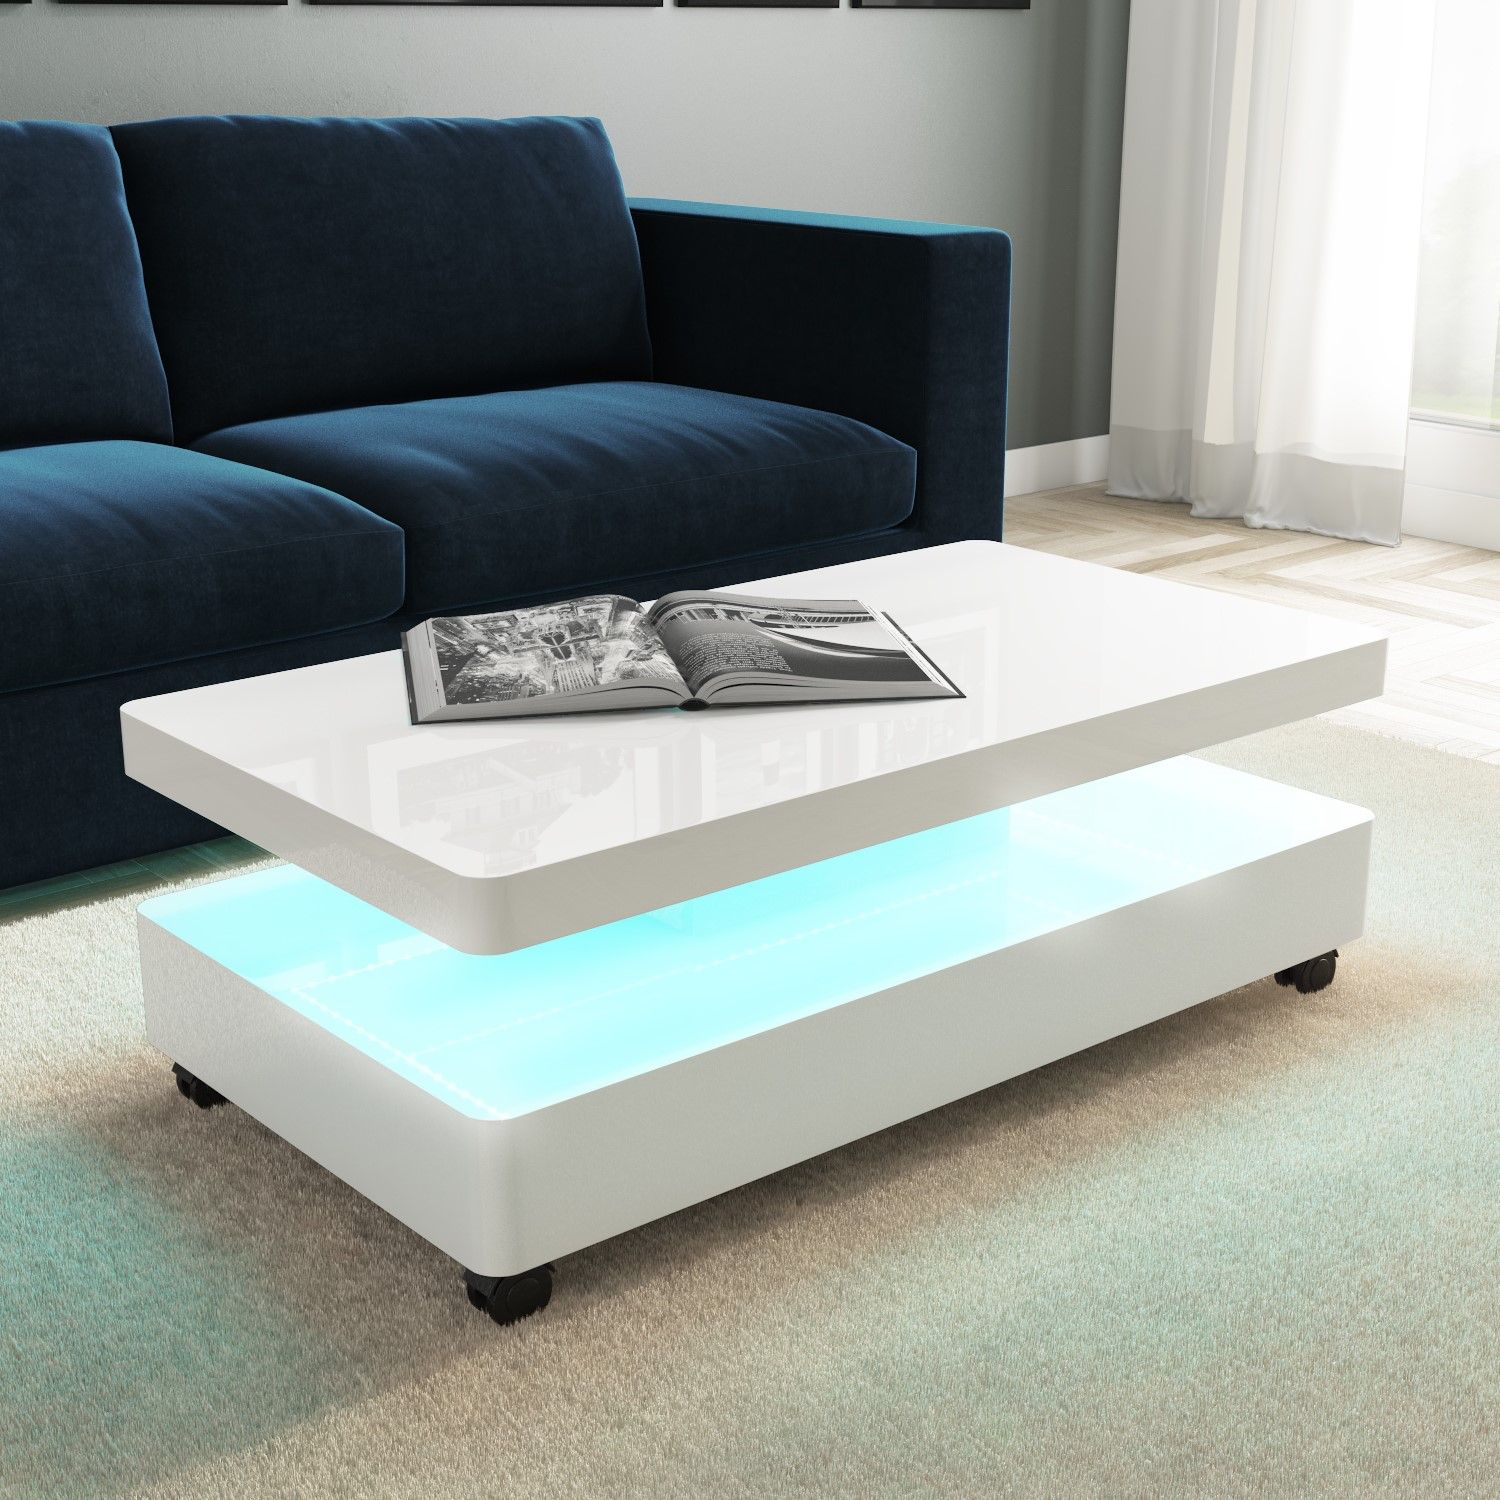 High Gloss White Coffee Table With Led Lighting 5060388562168 | Ebay With Regard To Coffee Tables With Drawers And Led Lights (View 5 of 15)